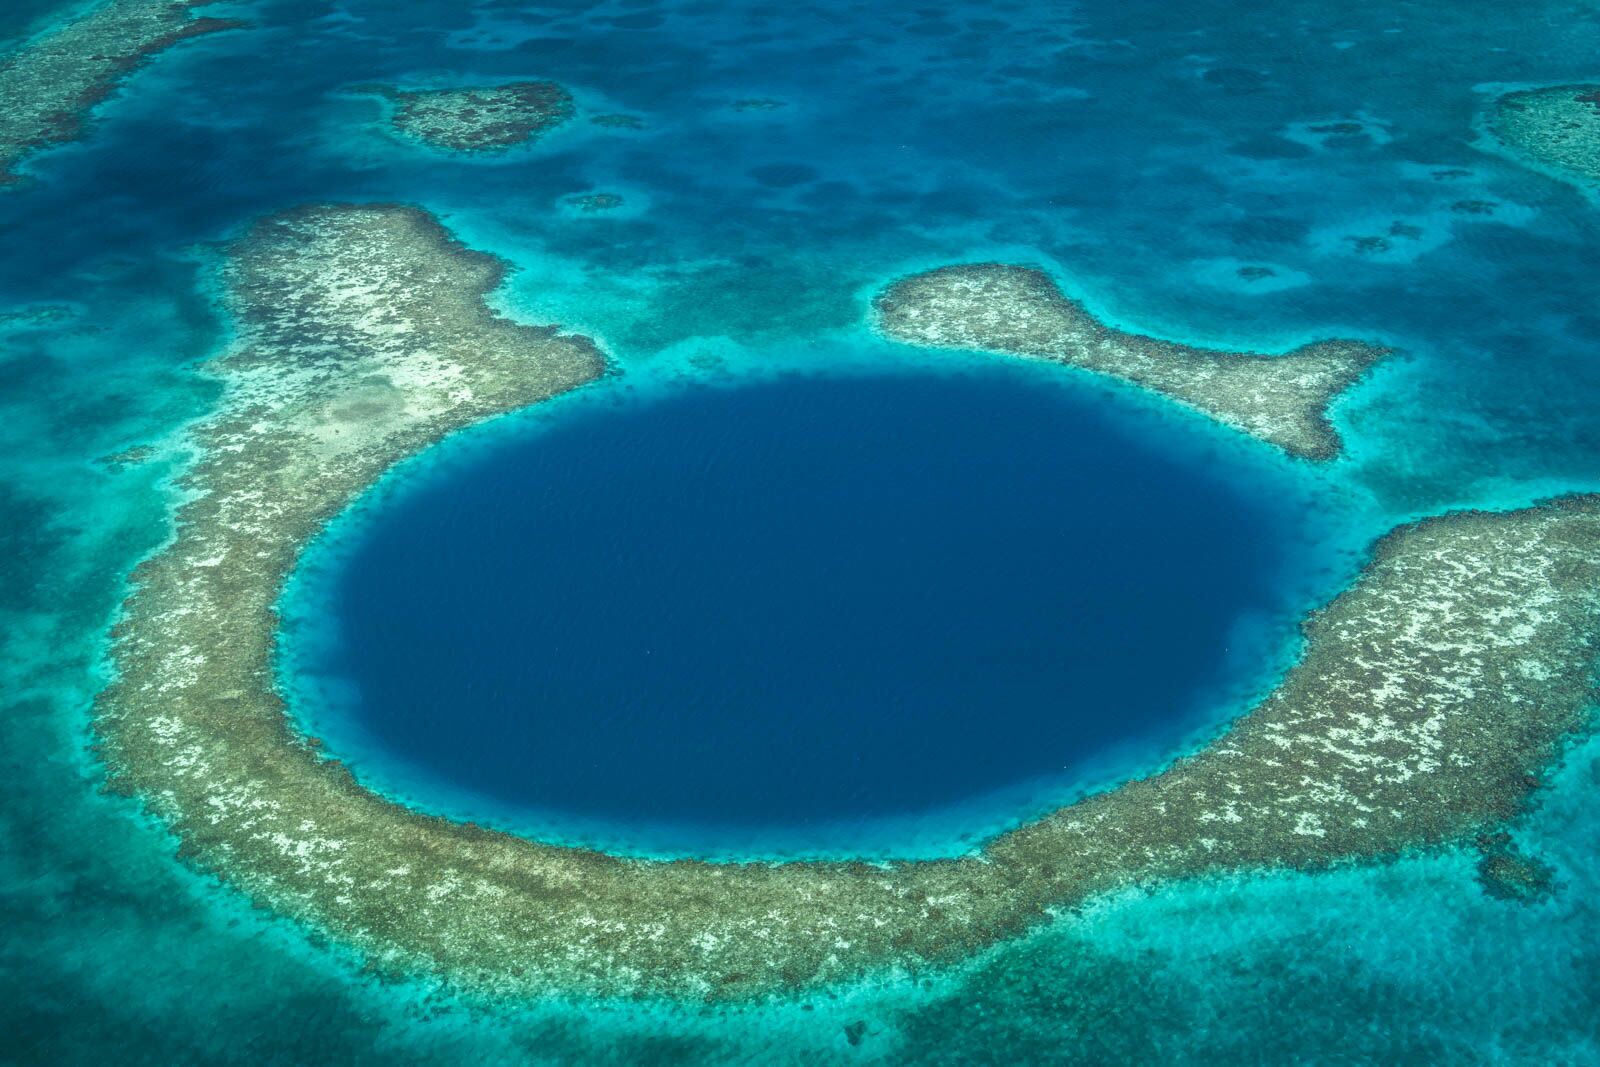 How to get to the Great Blue Hole in Belize